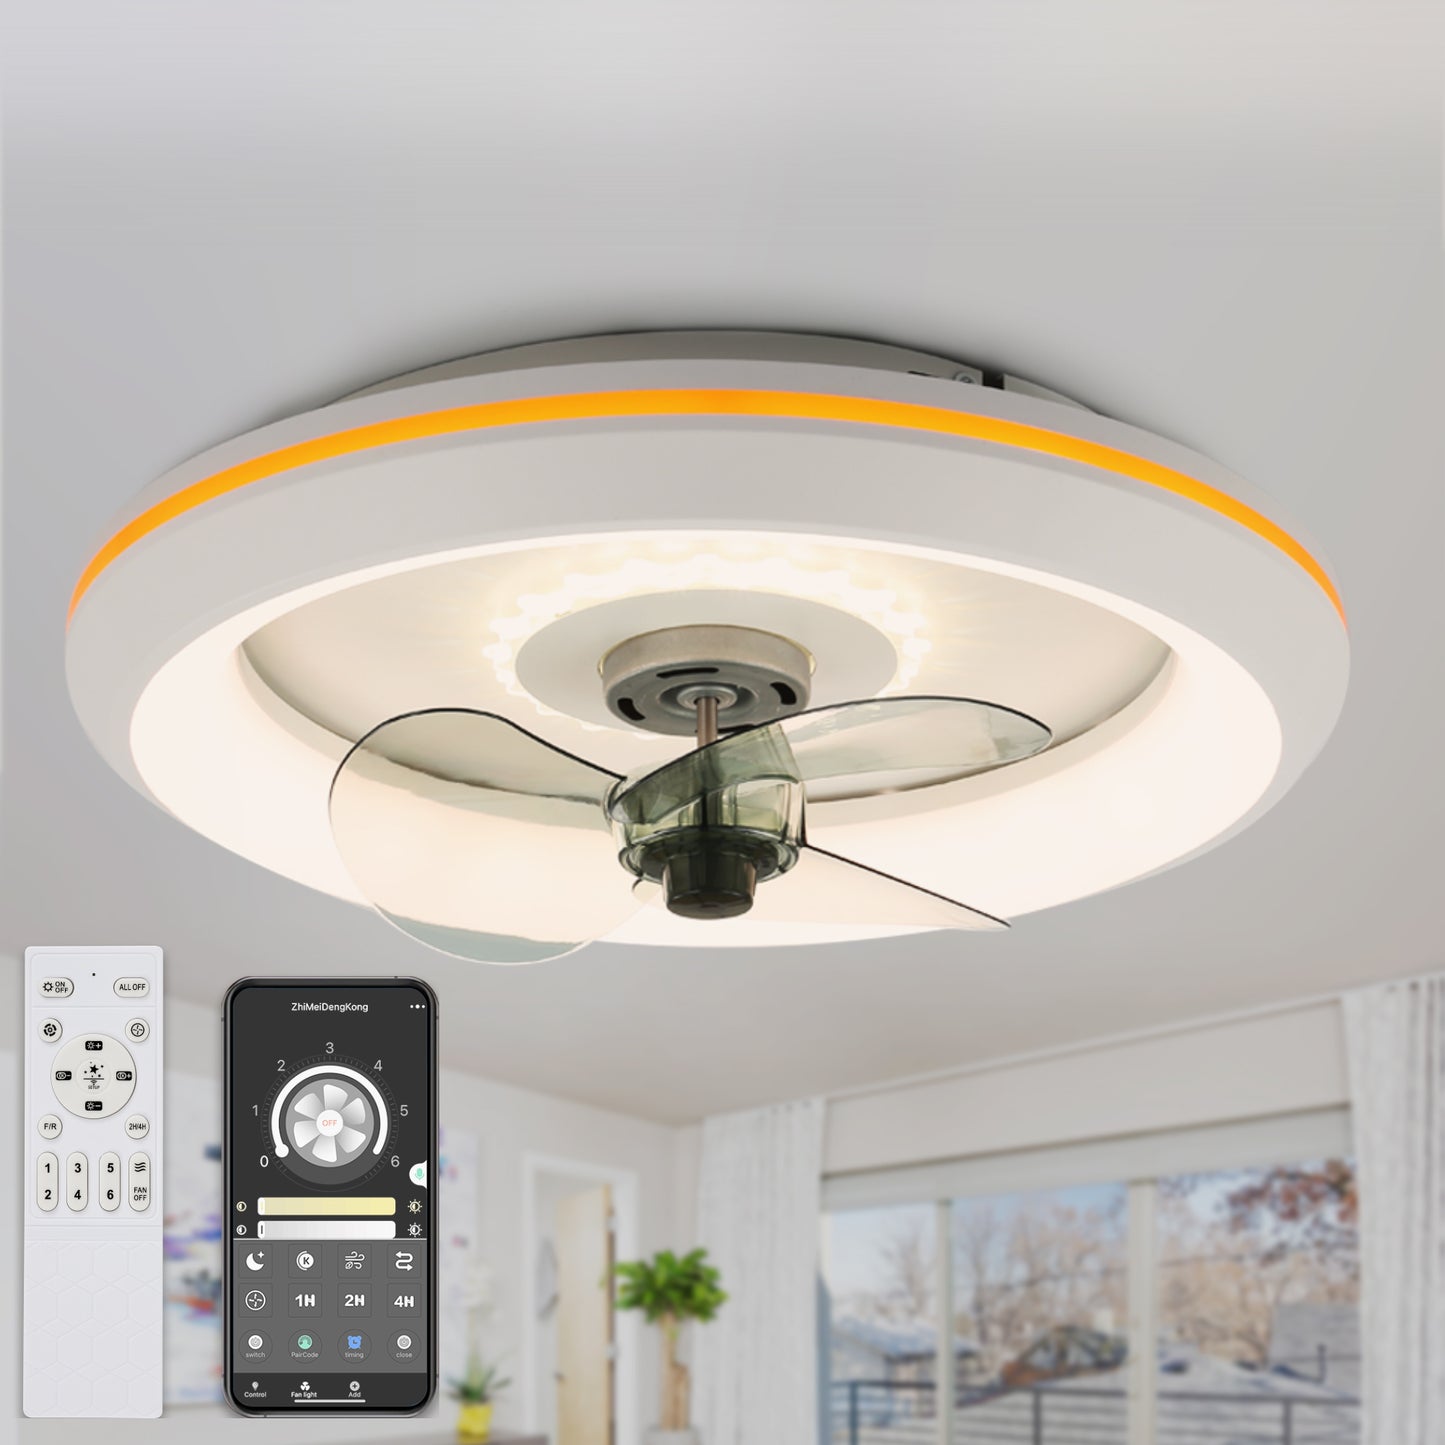 19" 3 - Blade LED Smart Flush Mount Ceiling Fan with Remote Control and Light Kit Included